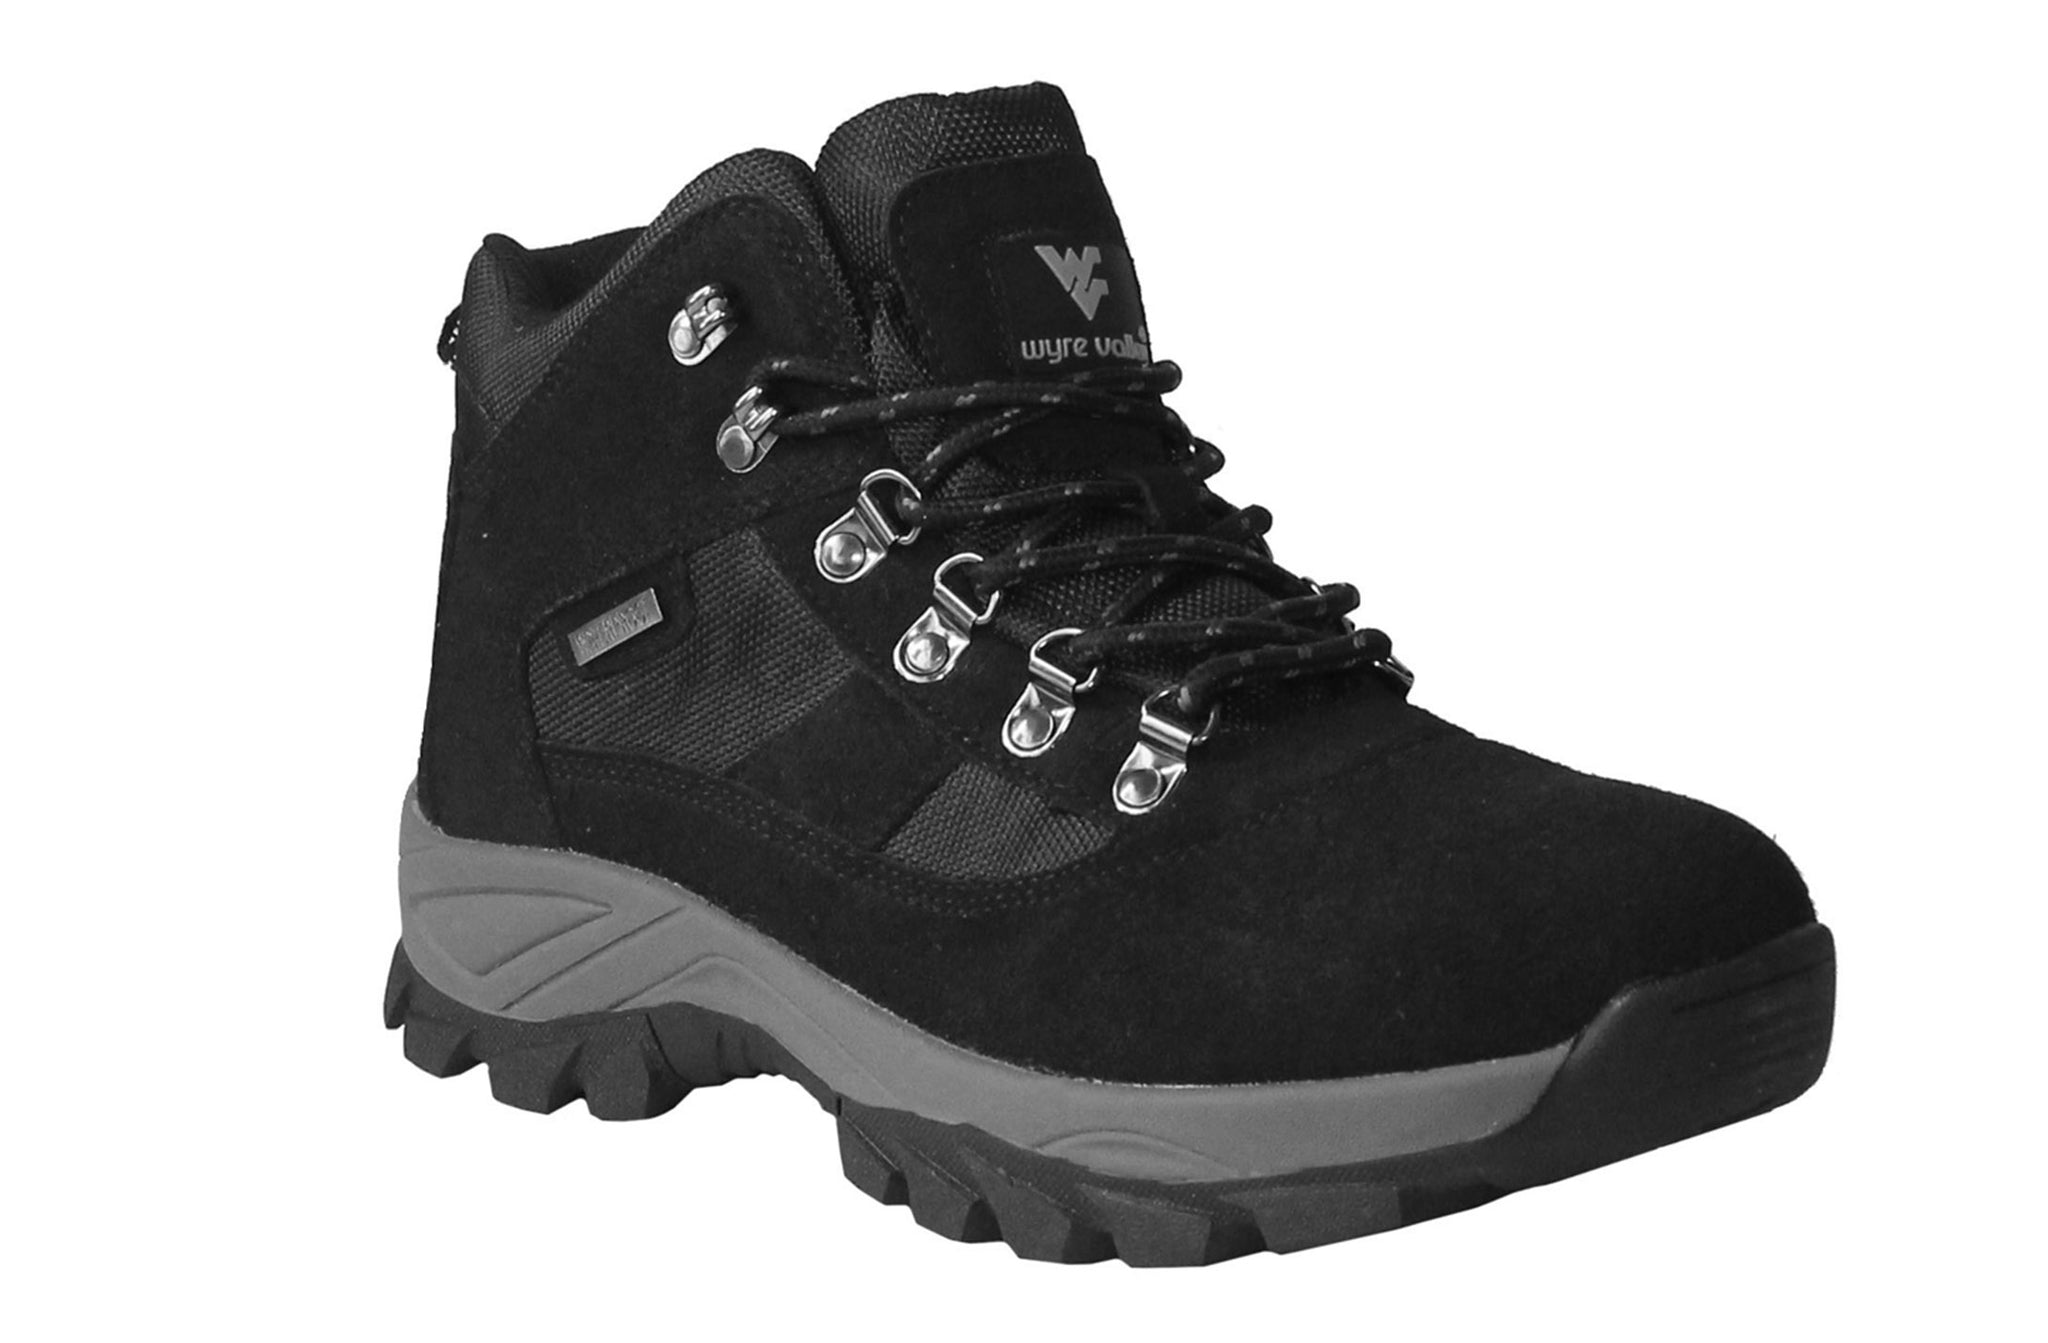 Wyre Valley Mens Black Suede Waterproof Leather Breathable Lace Up Memory Foam Hiking Boots